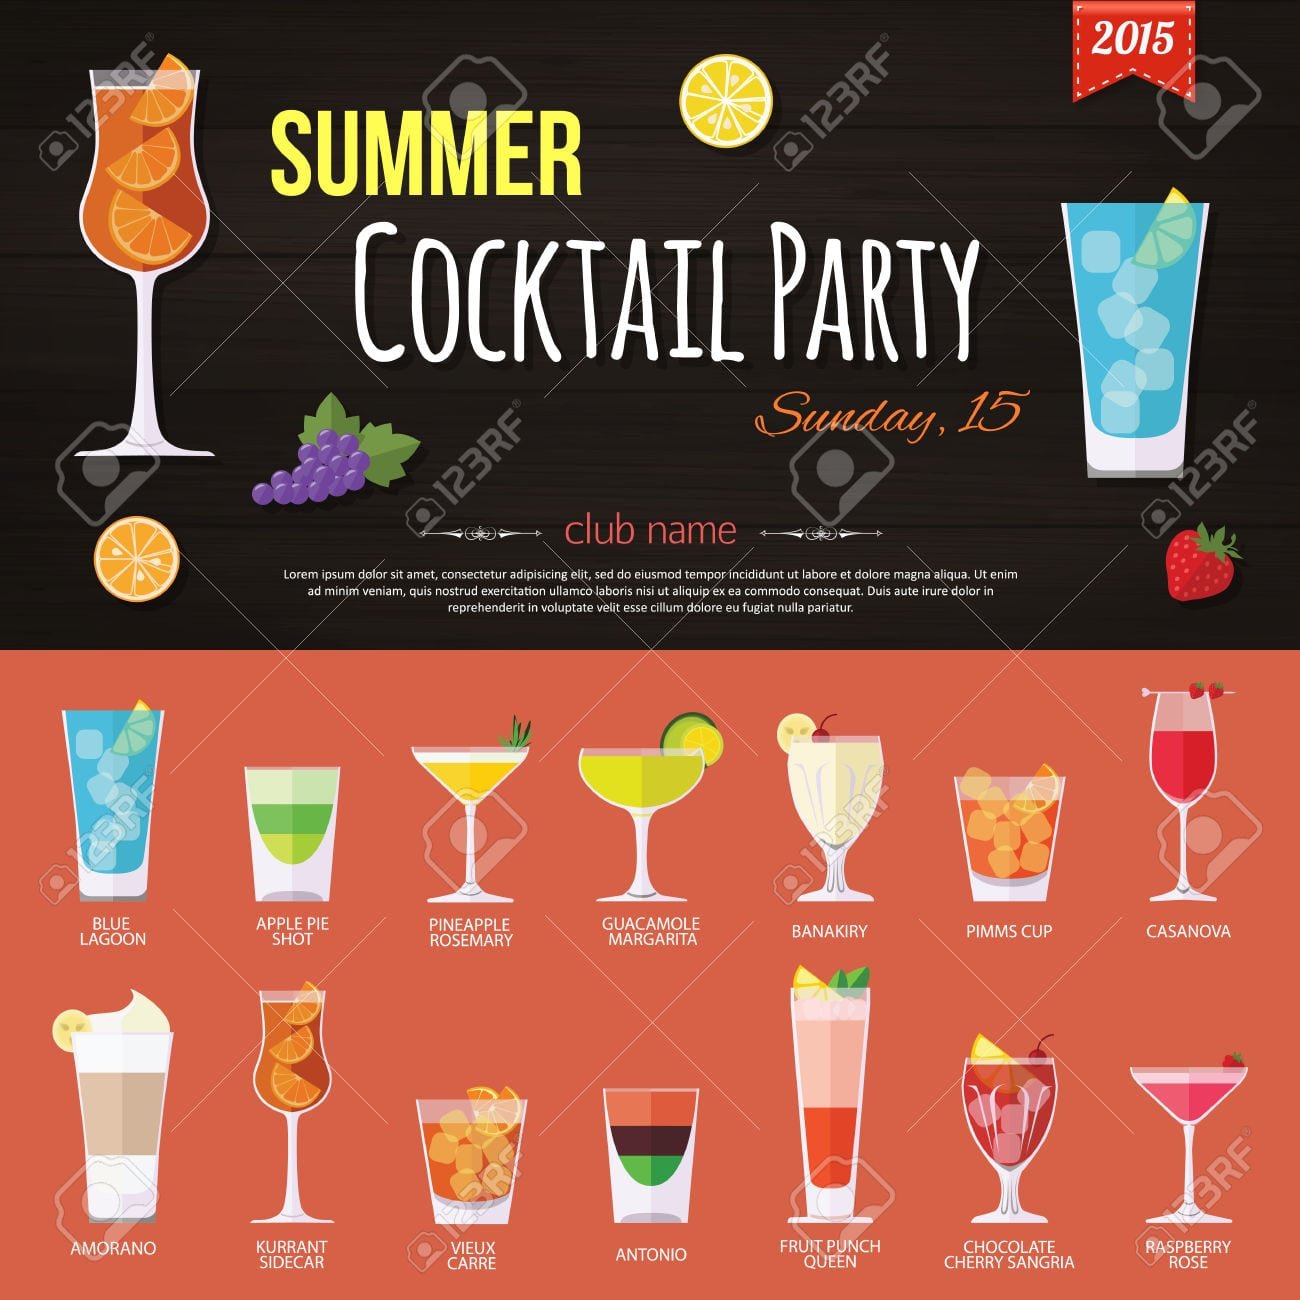 Summer Cocktail Party Invitation And Set Of Alcohol Cocktails